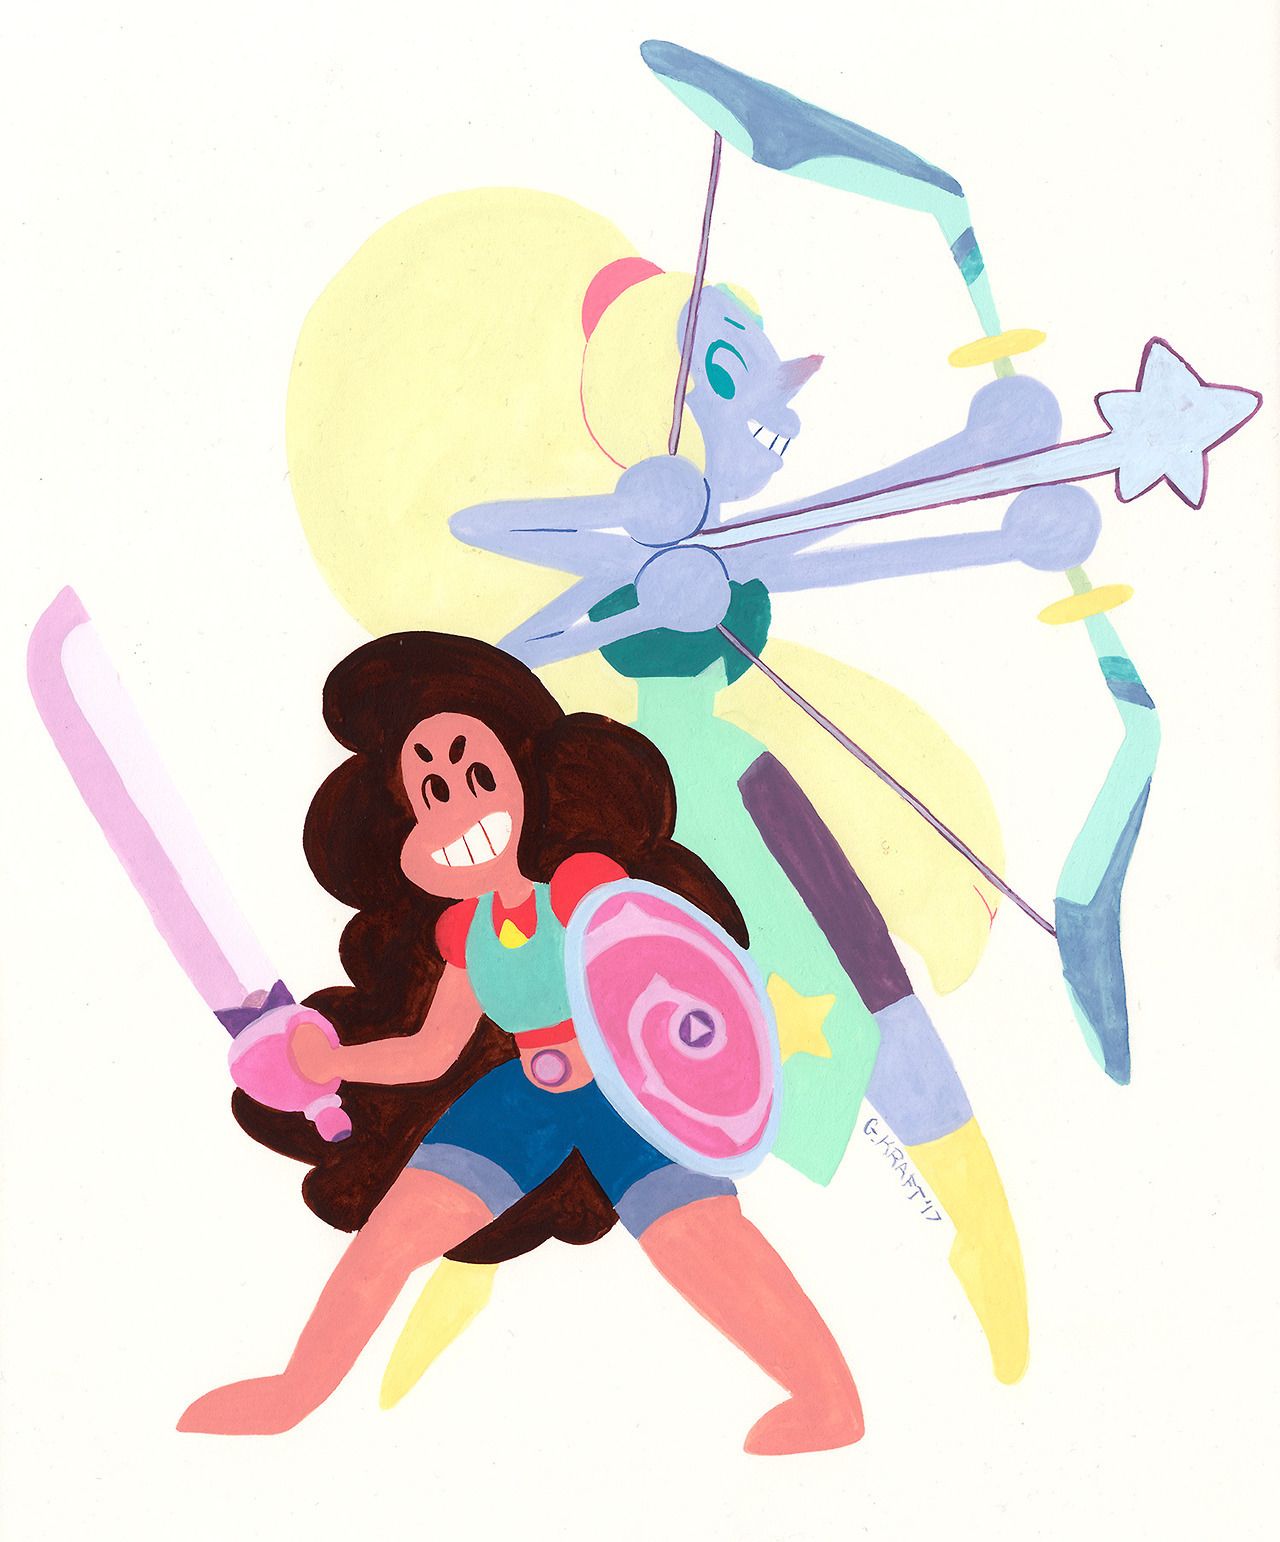 Pearlmethyst Week Day 7 - Hopal for Opal

 A bit late on this one but I wanted to make an Opal piece that also celebrated her appearance in Save the Light!  This was one of my favorite team combinations to use.  I like to call them the Giant Woman Jam Buds!